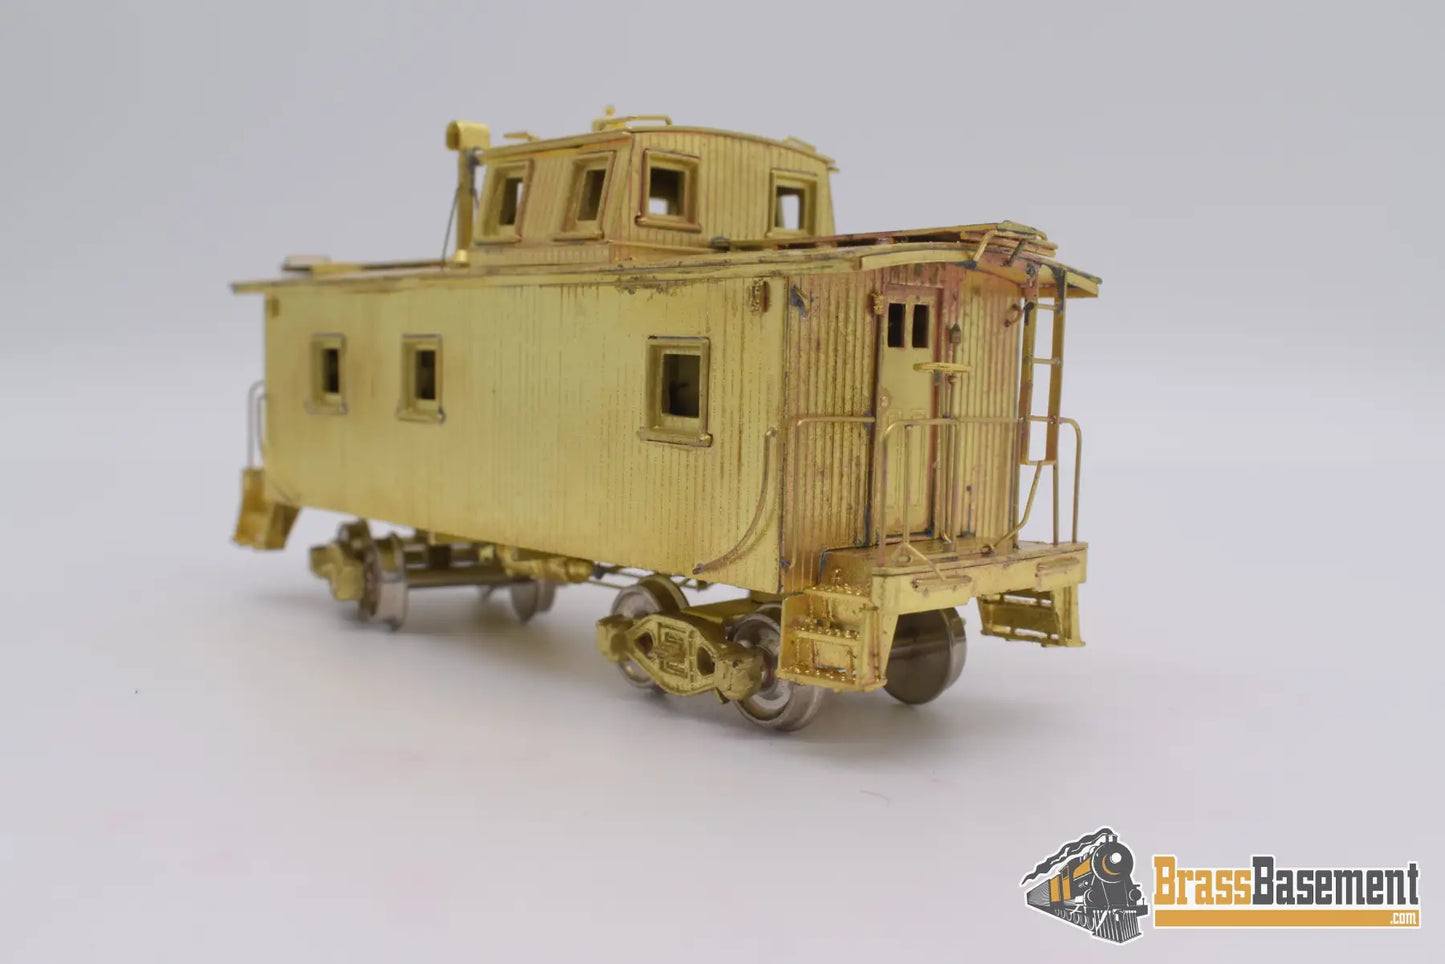 Ho Brass - Alco New York Central 24’ Wood Caboose Unpainted & Missing Step Freight